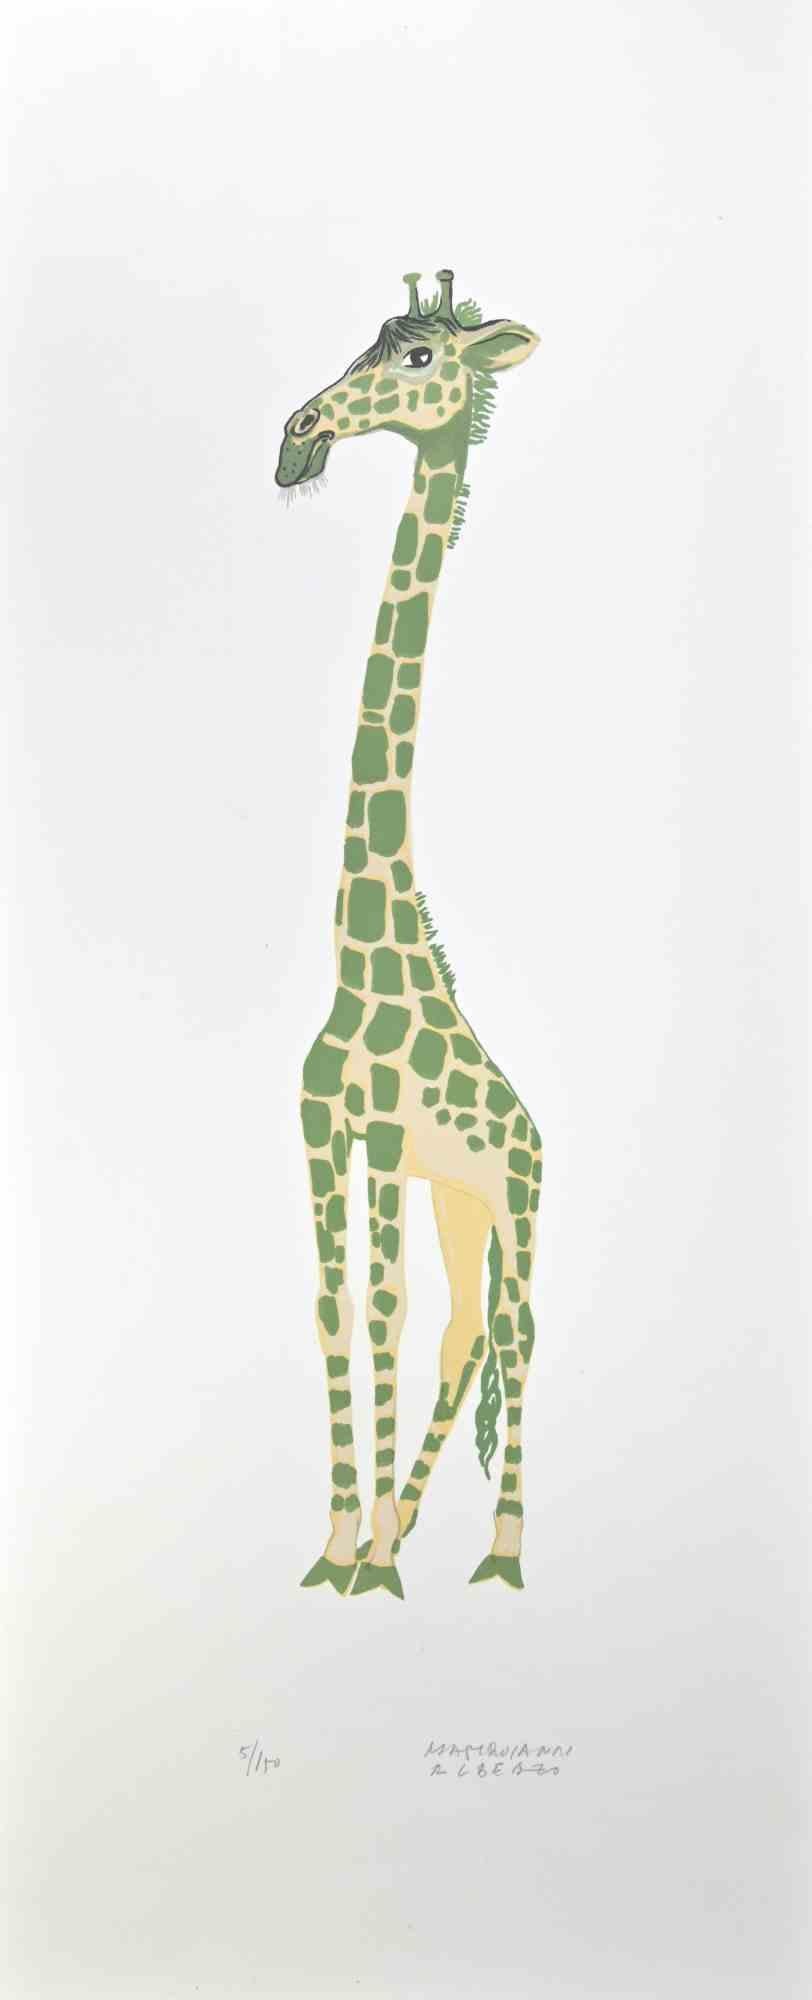 Girafe is a lithograph realized by Alberto Mastroianni in the 1970s.

Hand Signed on the lower right margin. Numbered on the lower margin in pencil. 

The artwork represents an interesting green girafe, a combination of fantasy and realism.

The